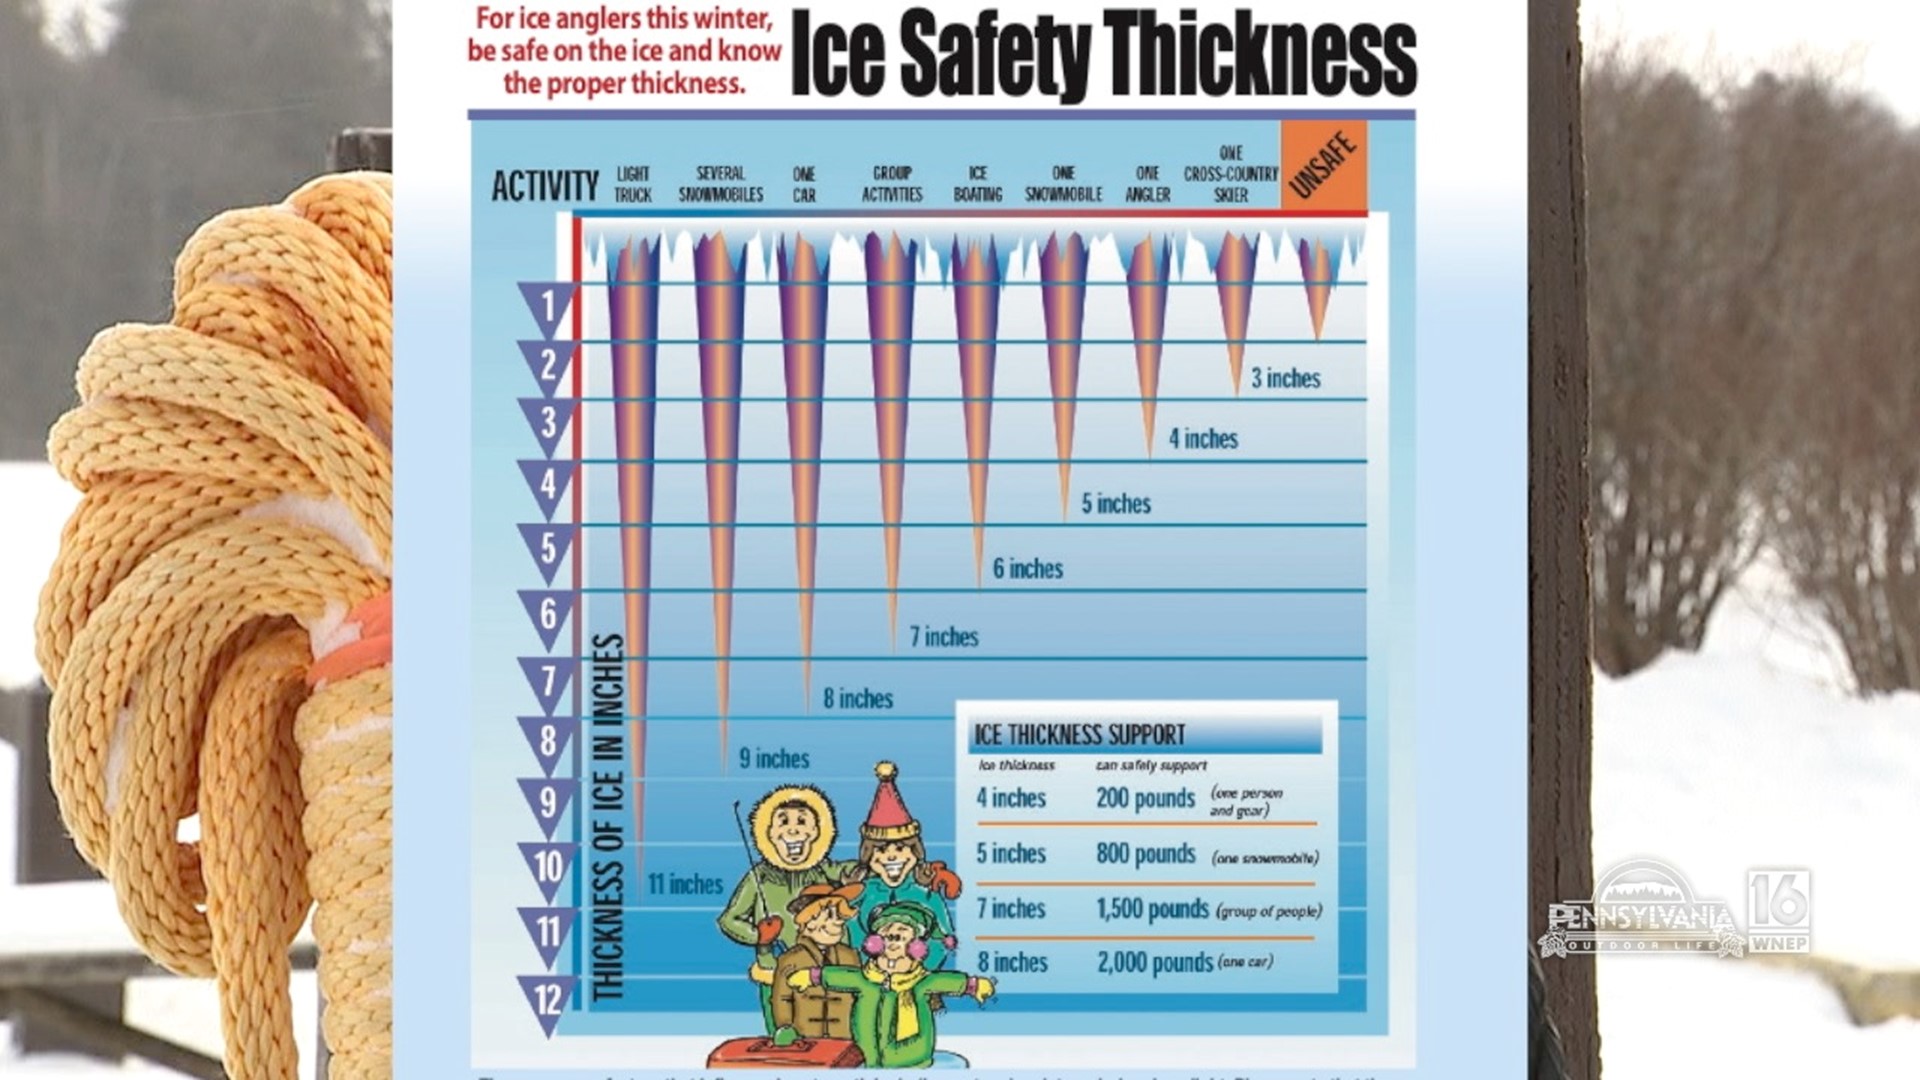 Taking steps to make sure you're safe on the ice this winter.